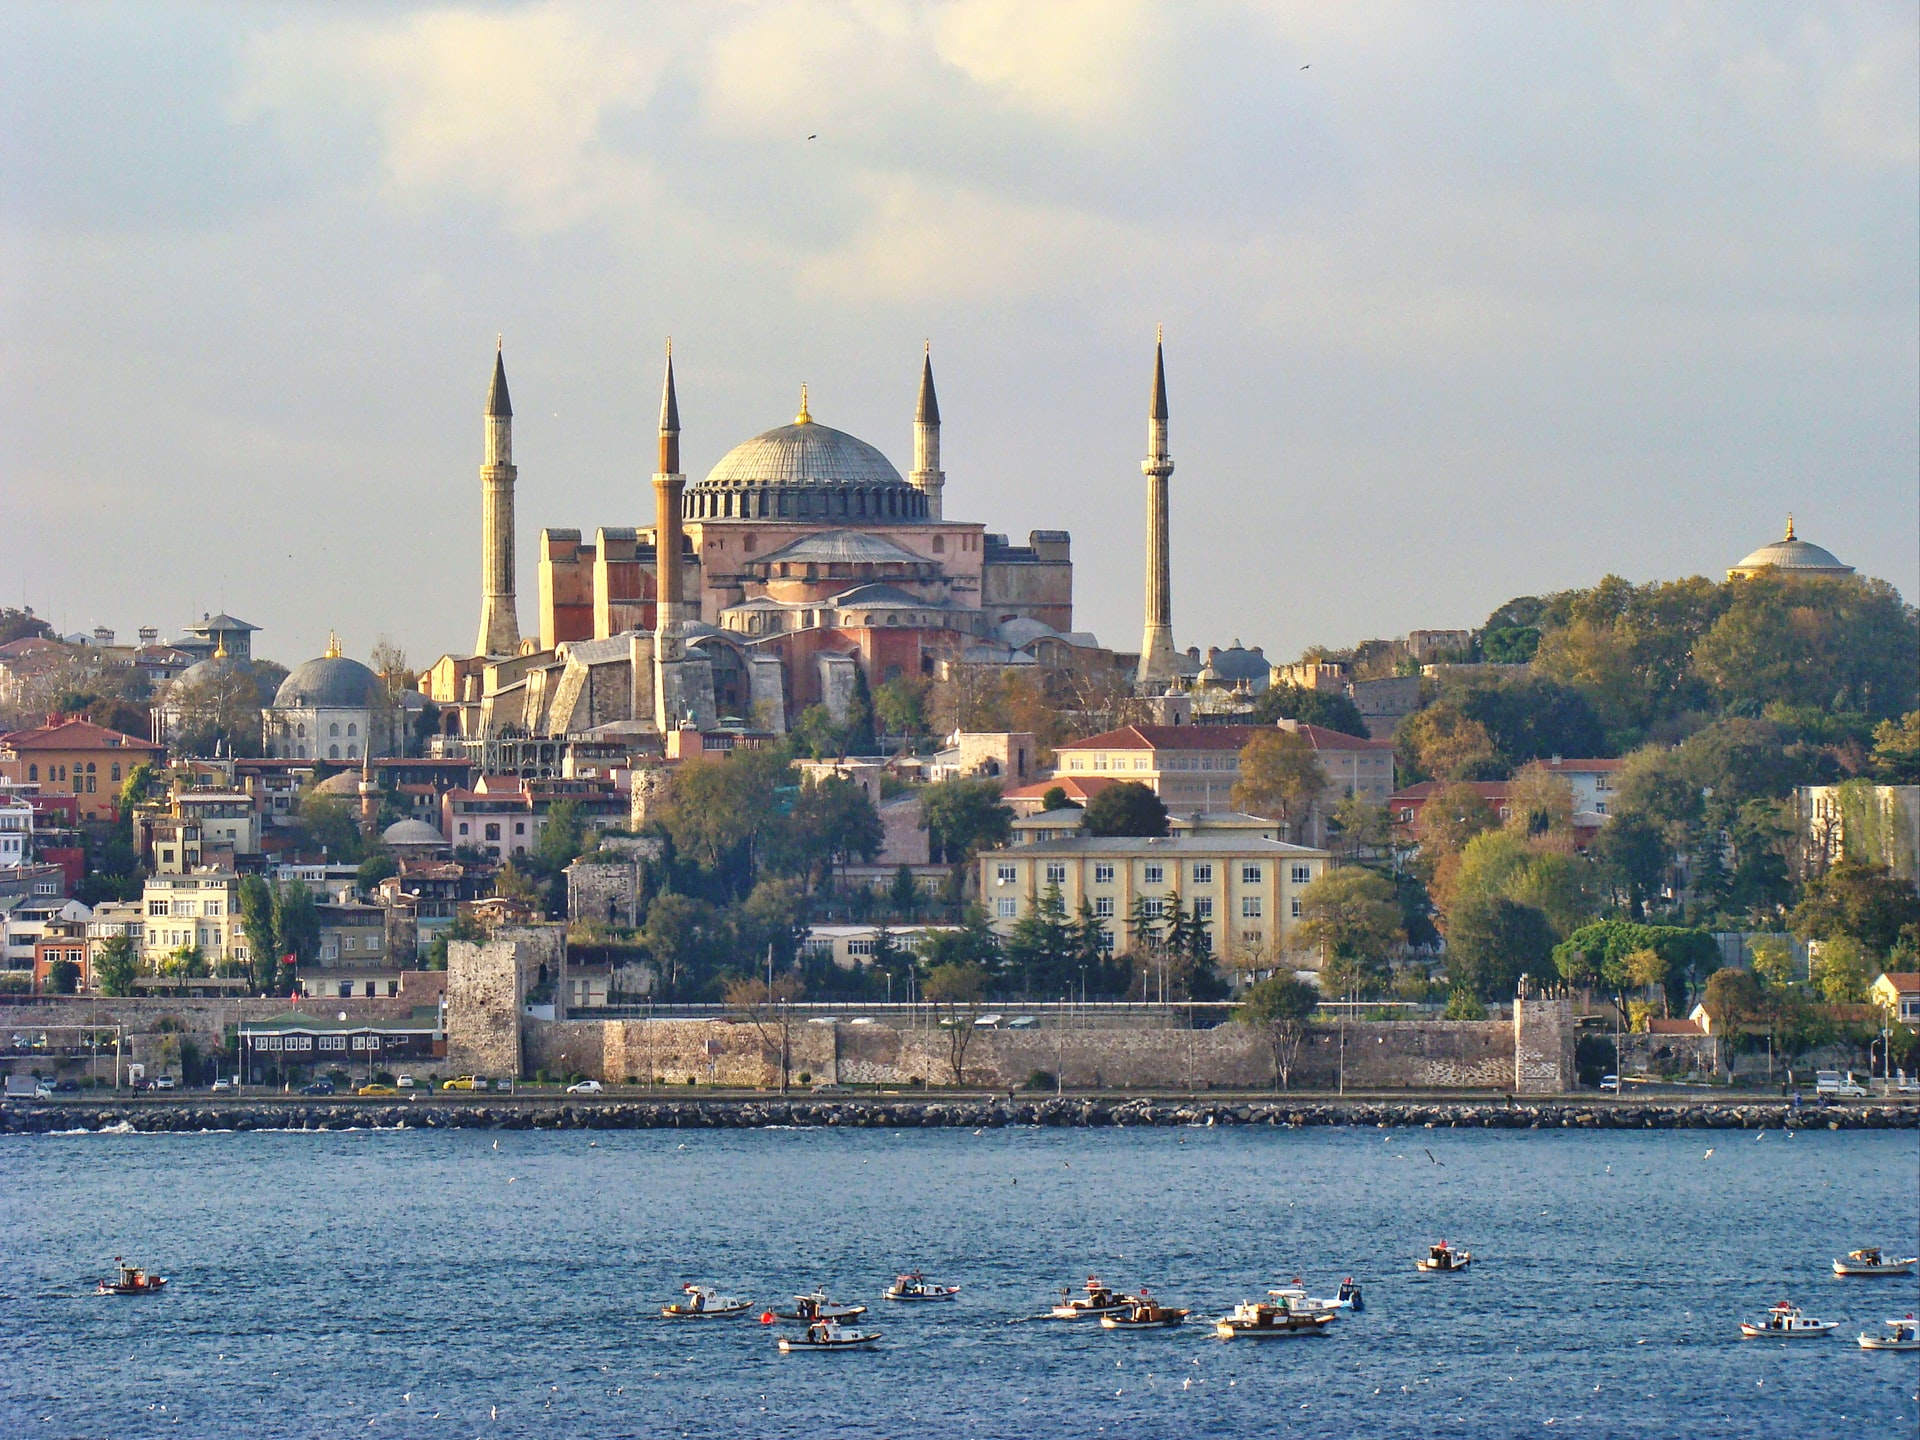 Also known as Fatih, the Sultanahmet area is home to Istanbul's most visited tourist attractions and the best area to stay in Istanbul for sightseeing.